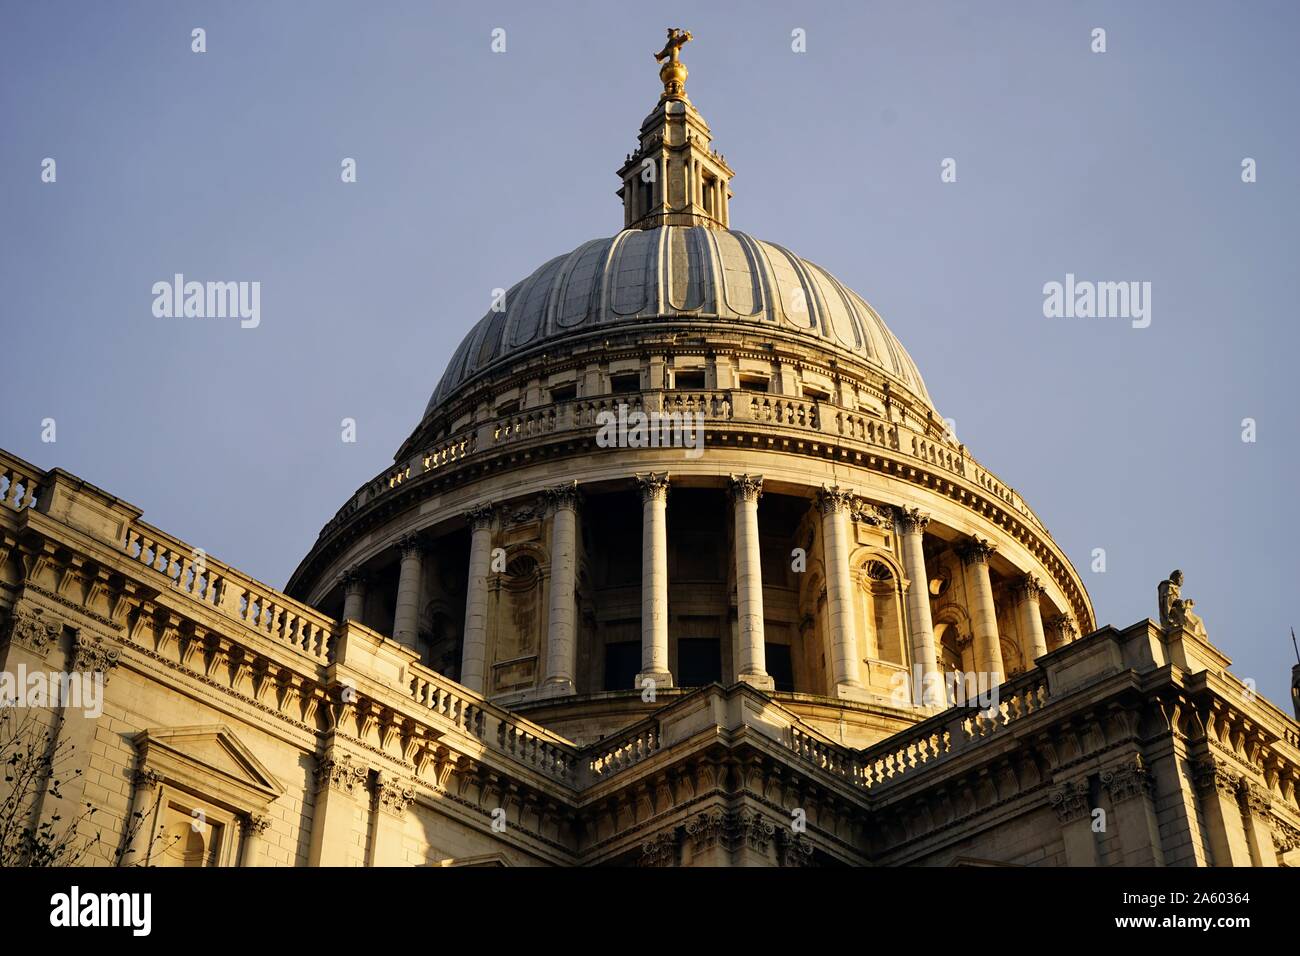 View of St Paul's Cathedral designed by Sir Christopher Wren (1632-1723) English Architect. Dated 2015 Stock Photo